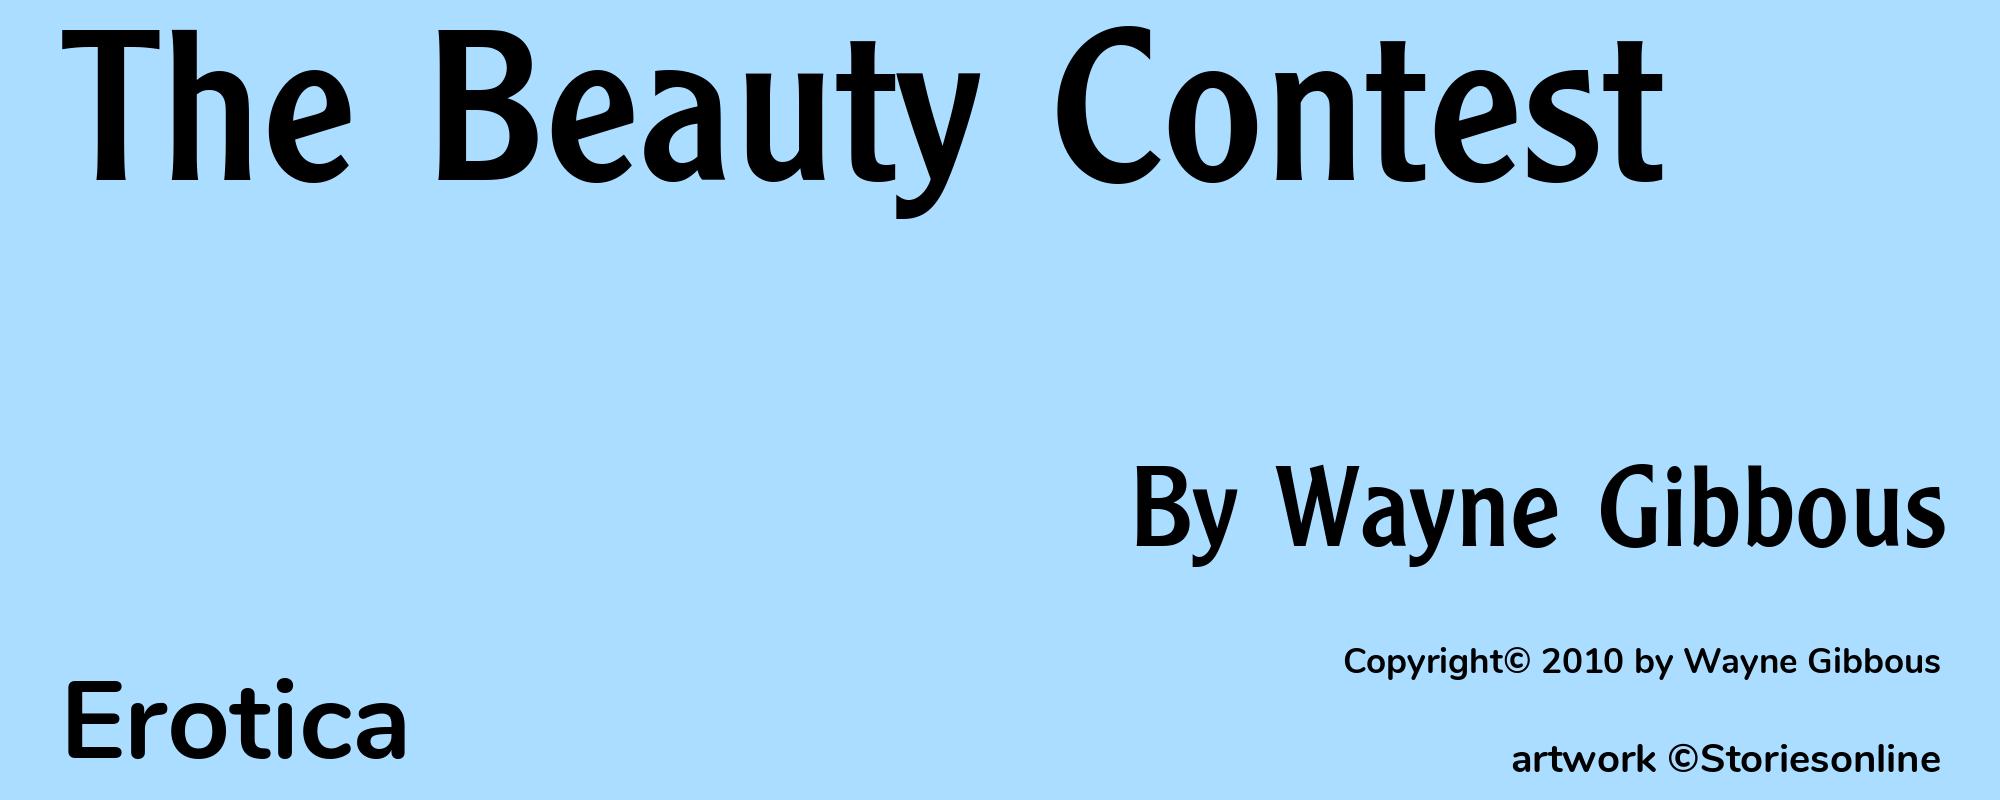 The Beauty Contest - Cover